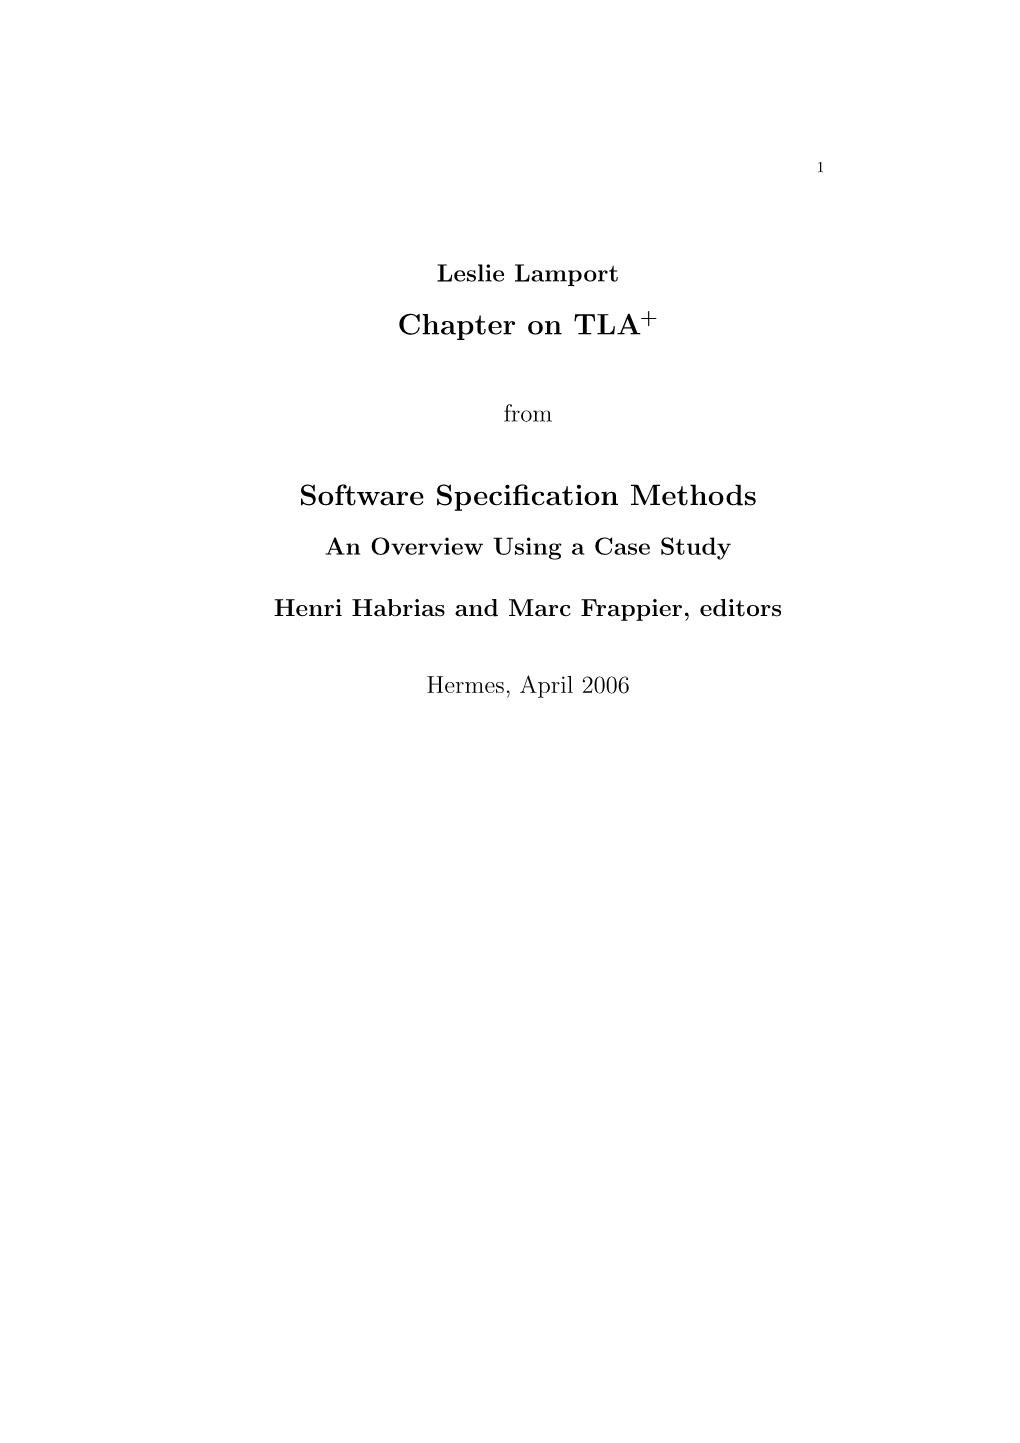 Chapter on TLA+ Software Specification Methods